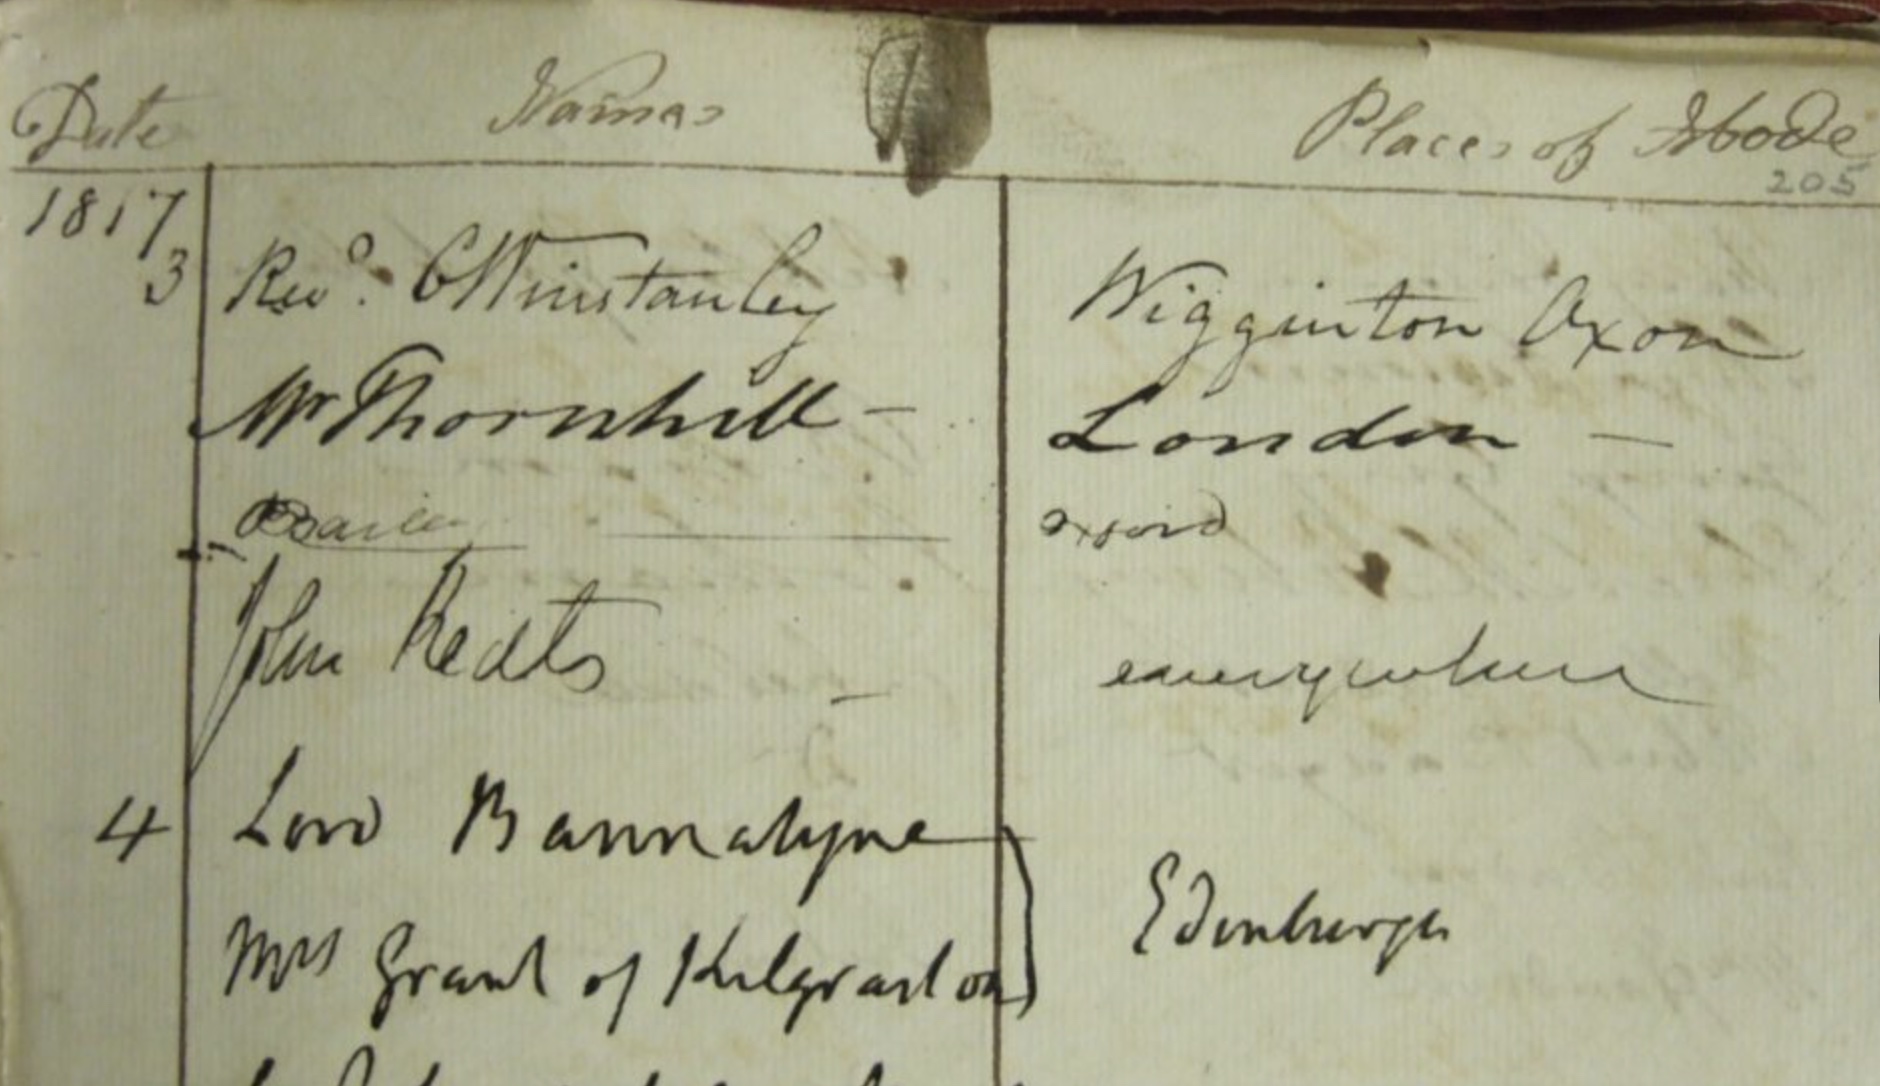 Keats signs the visitors’ book at Shakespeare’s birthplace, with his Place of
        Abode as everywhere. The full book is at the Shakespeare Birthplace Trust archives
        (DR185/1). Click to enlarge.